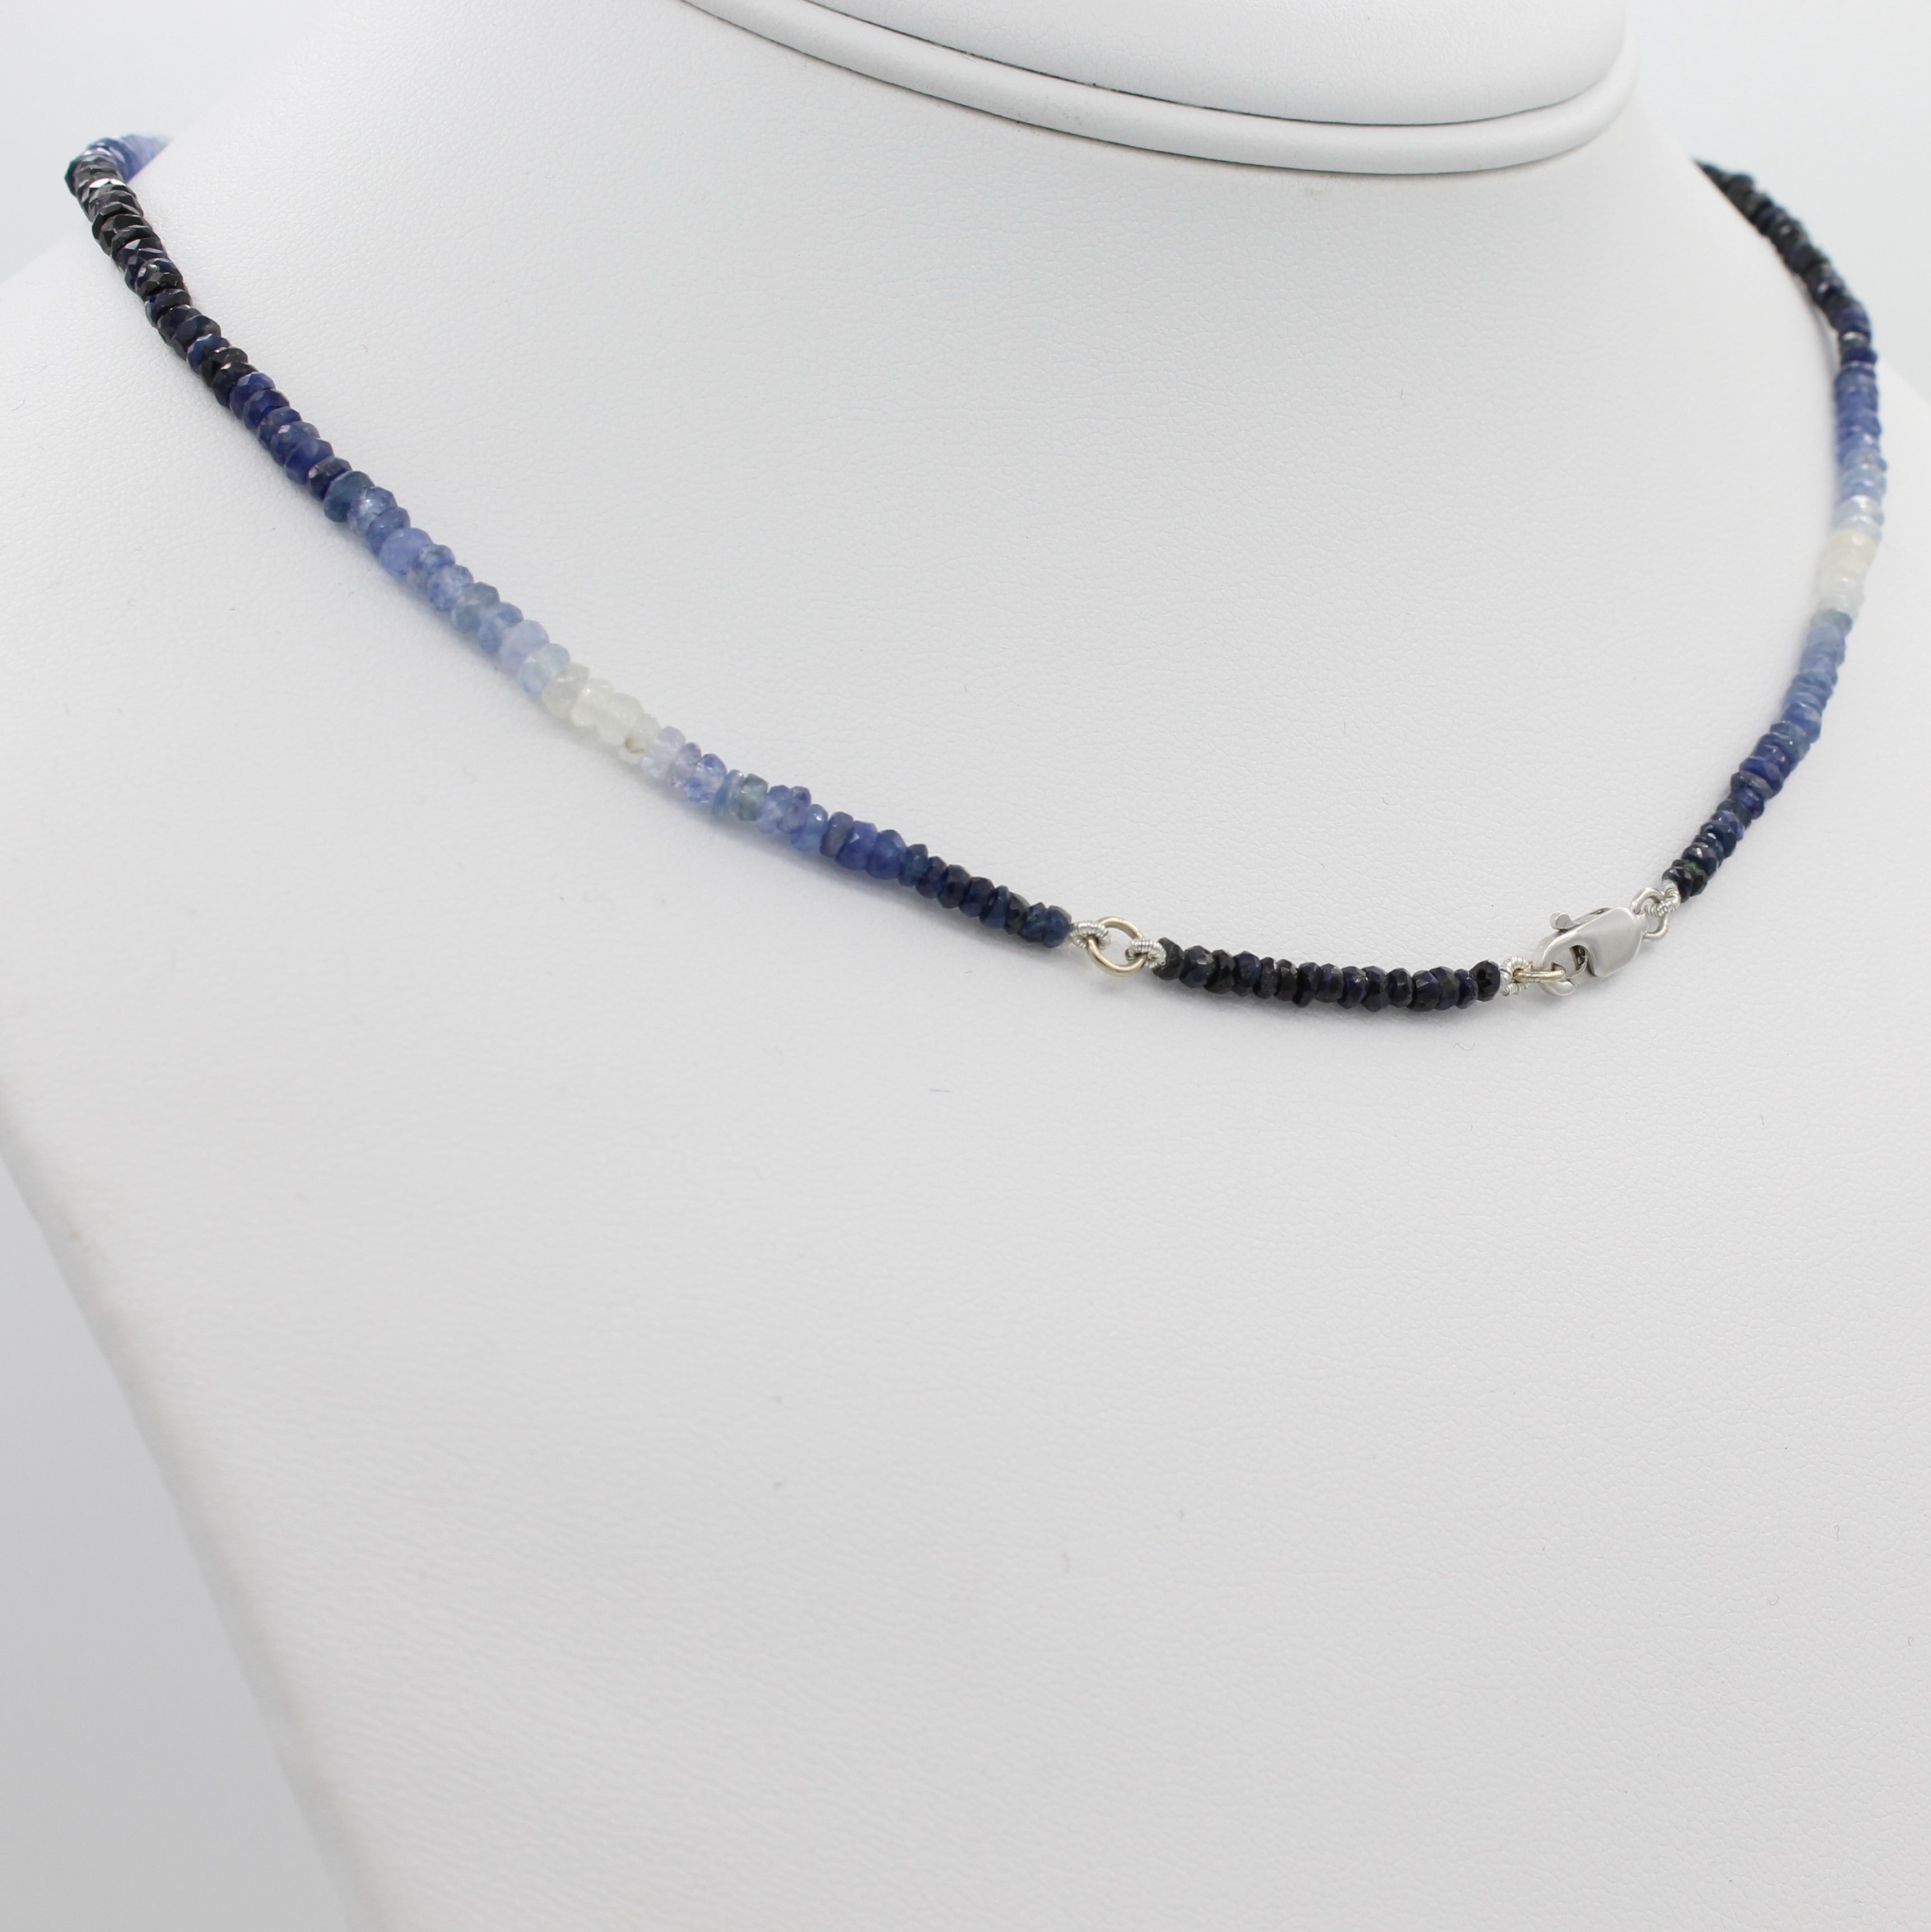 Beauty in Blue 40CT Adjustable Ombre Sapphire Choker Necklace, a view of the necklace's lobster clasp closure. 